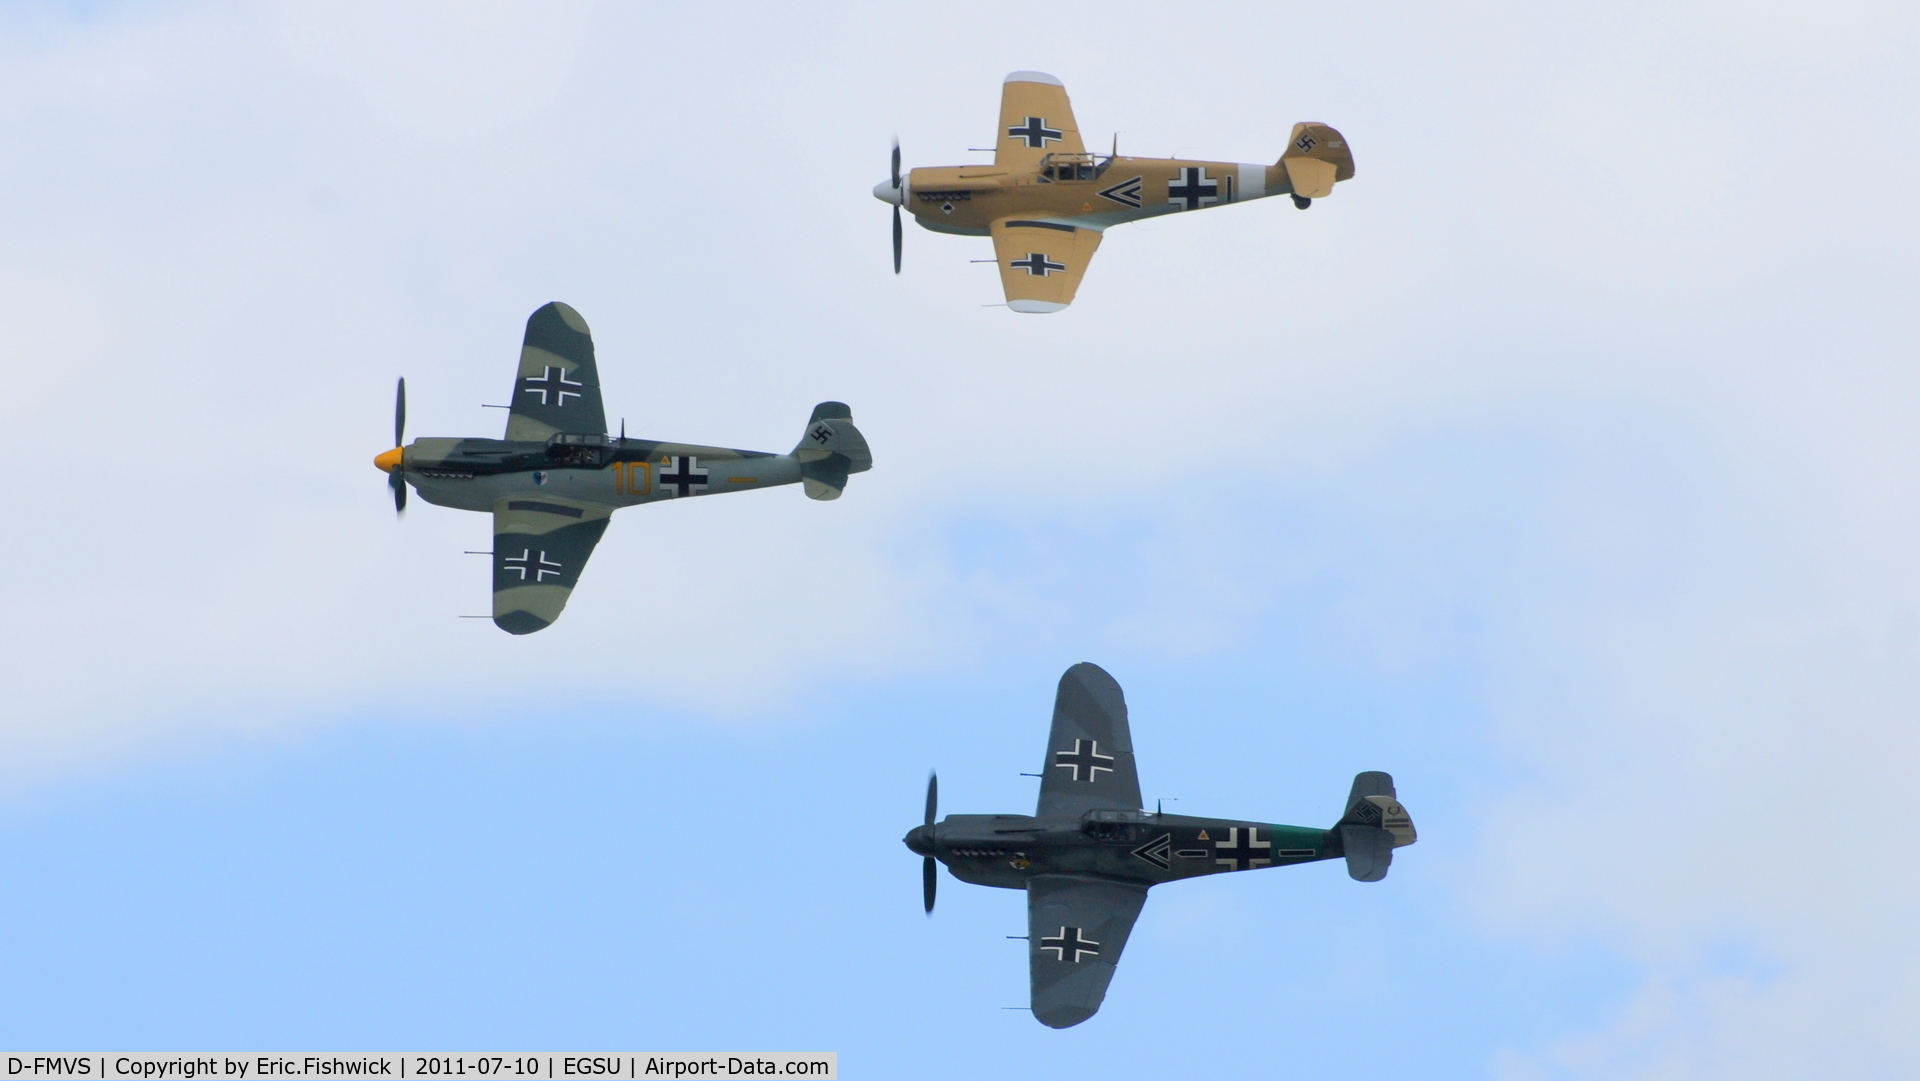 D-FMVS, Hispano HA-1112-M1L Buchon C/N 234, D-FMVS with G-BWUE and G-AWHE in an historic flypast at another excellent Flying Legends Air Show (July 2011)